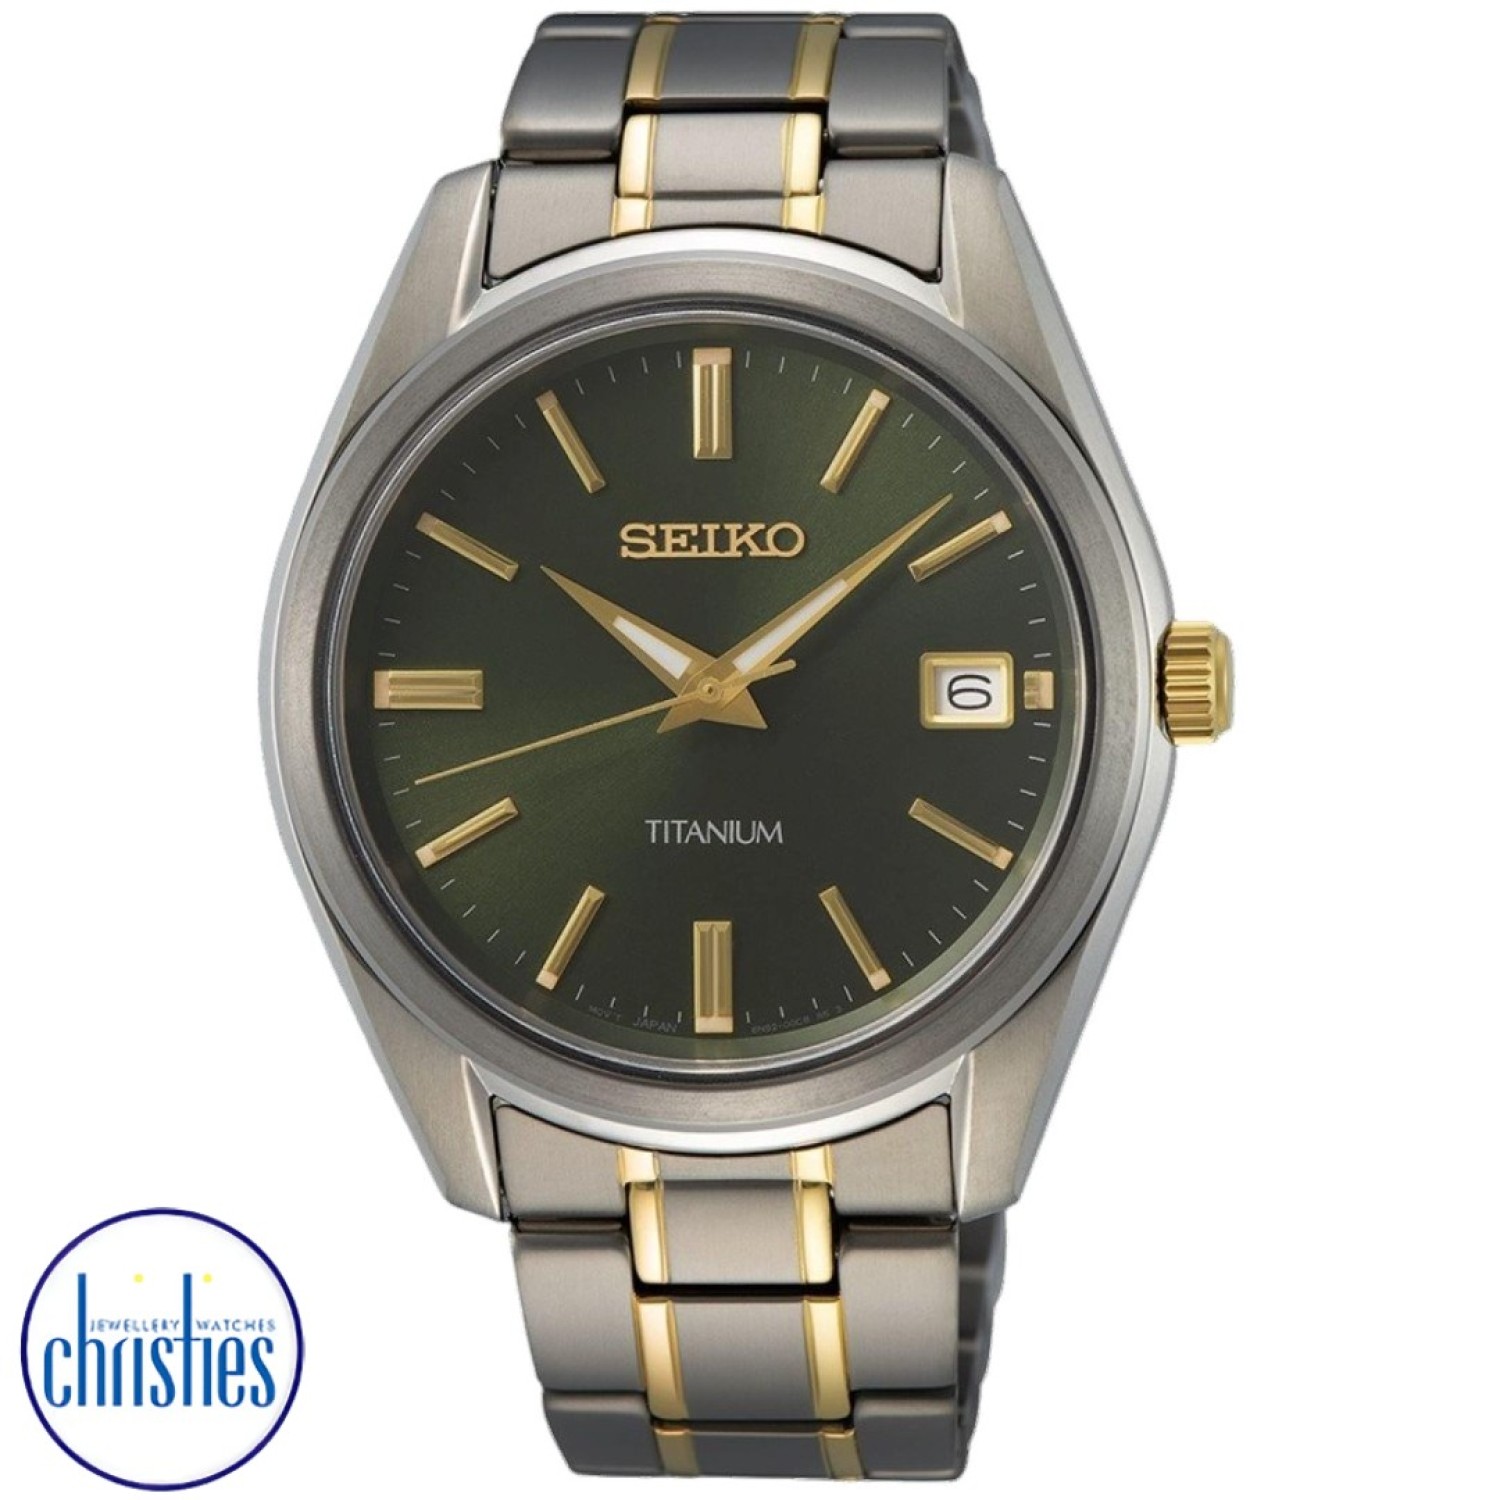 SUR377 Seiko Mens Titanium Watch SUR377P Seiko Watches NZ |  Seiko's commitment to craftsmanship ensures that each watch is made with precision and attention to detail.